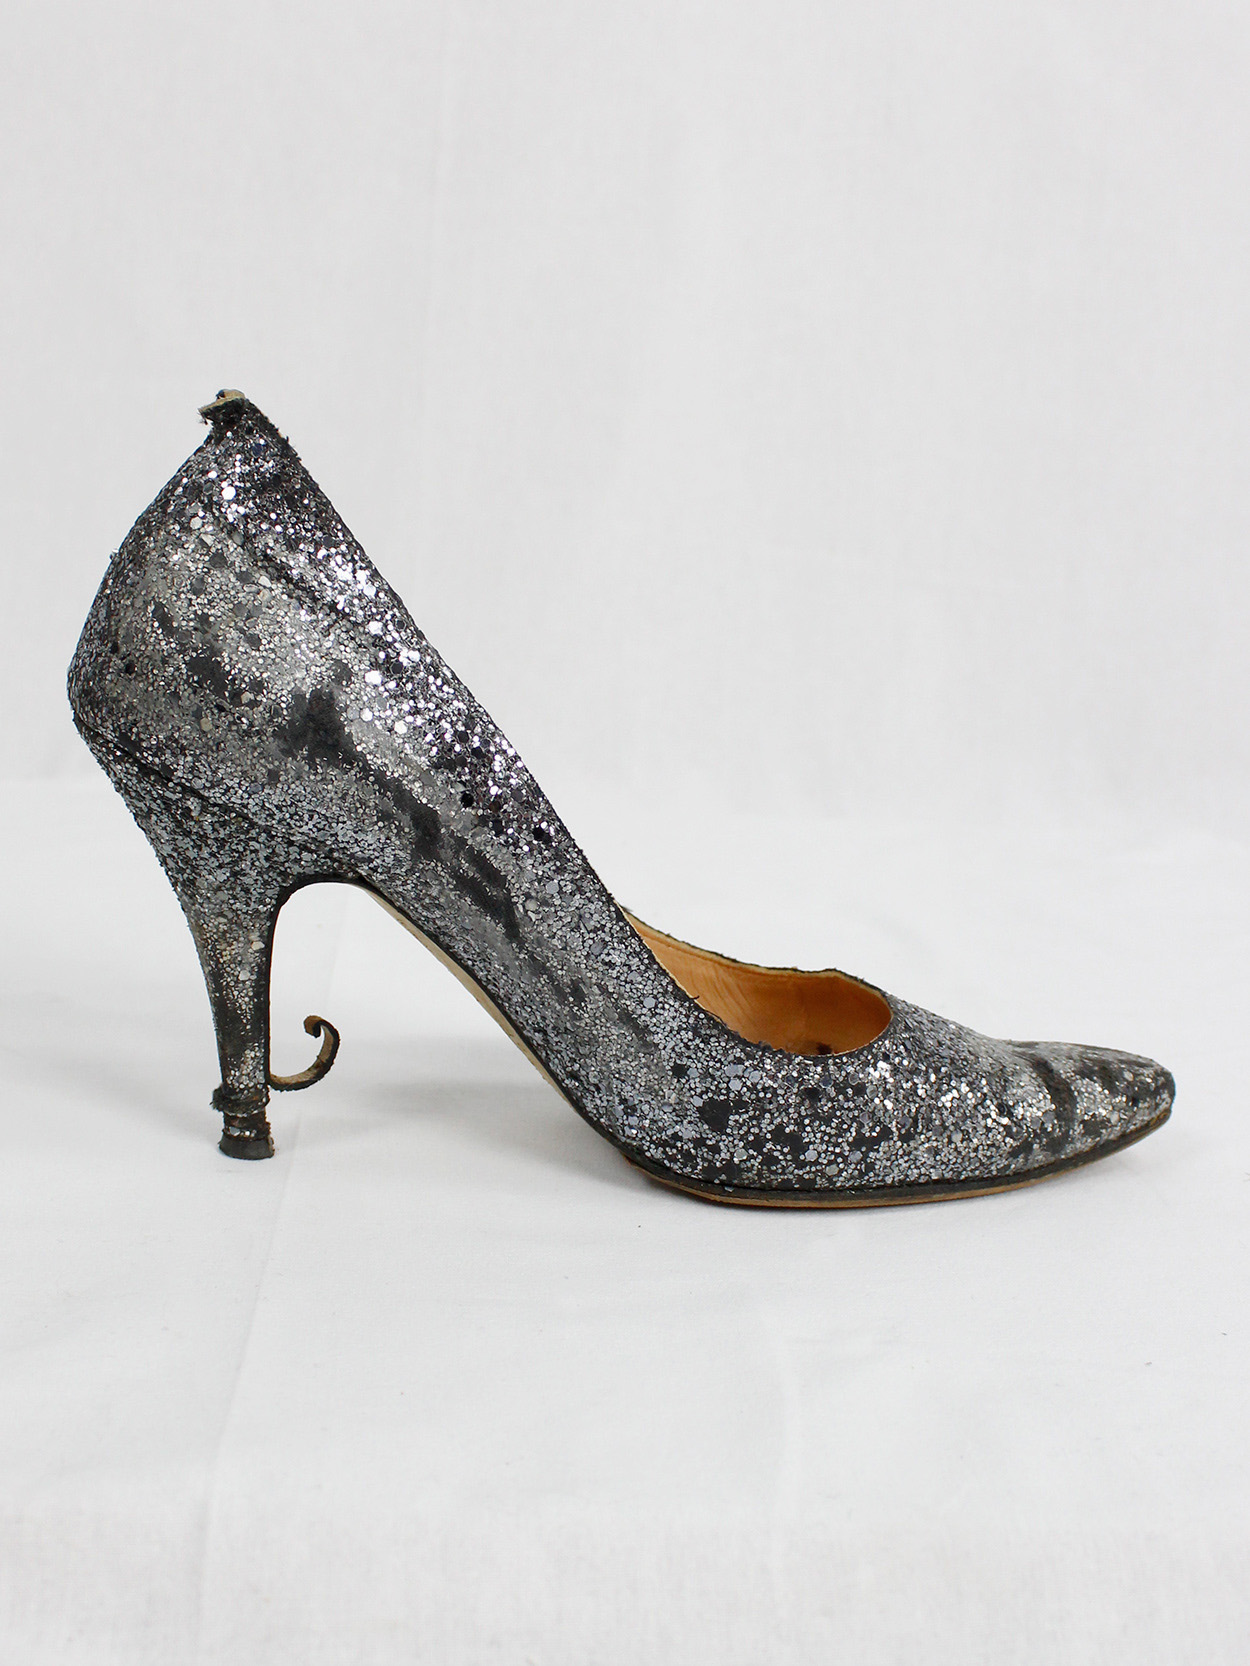 Maison Martin Margiela silver glitter afterparty pumps with destroyed look (61) — spring 2005